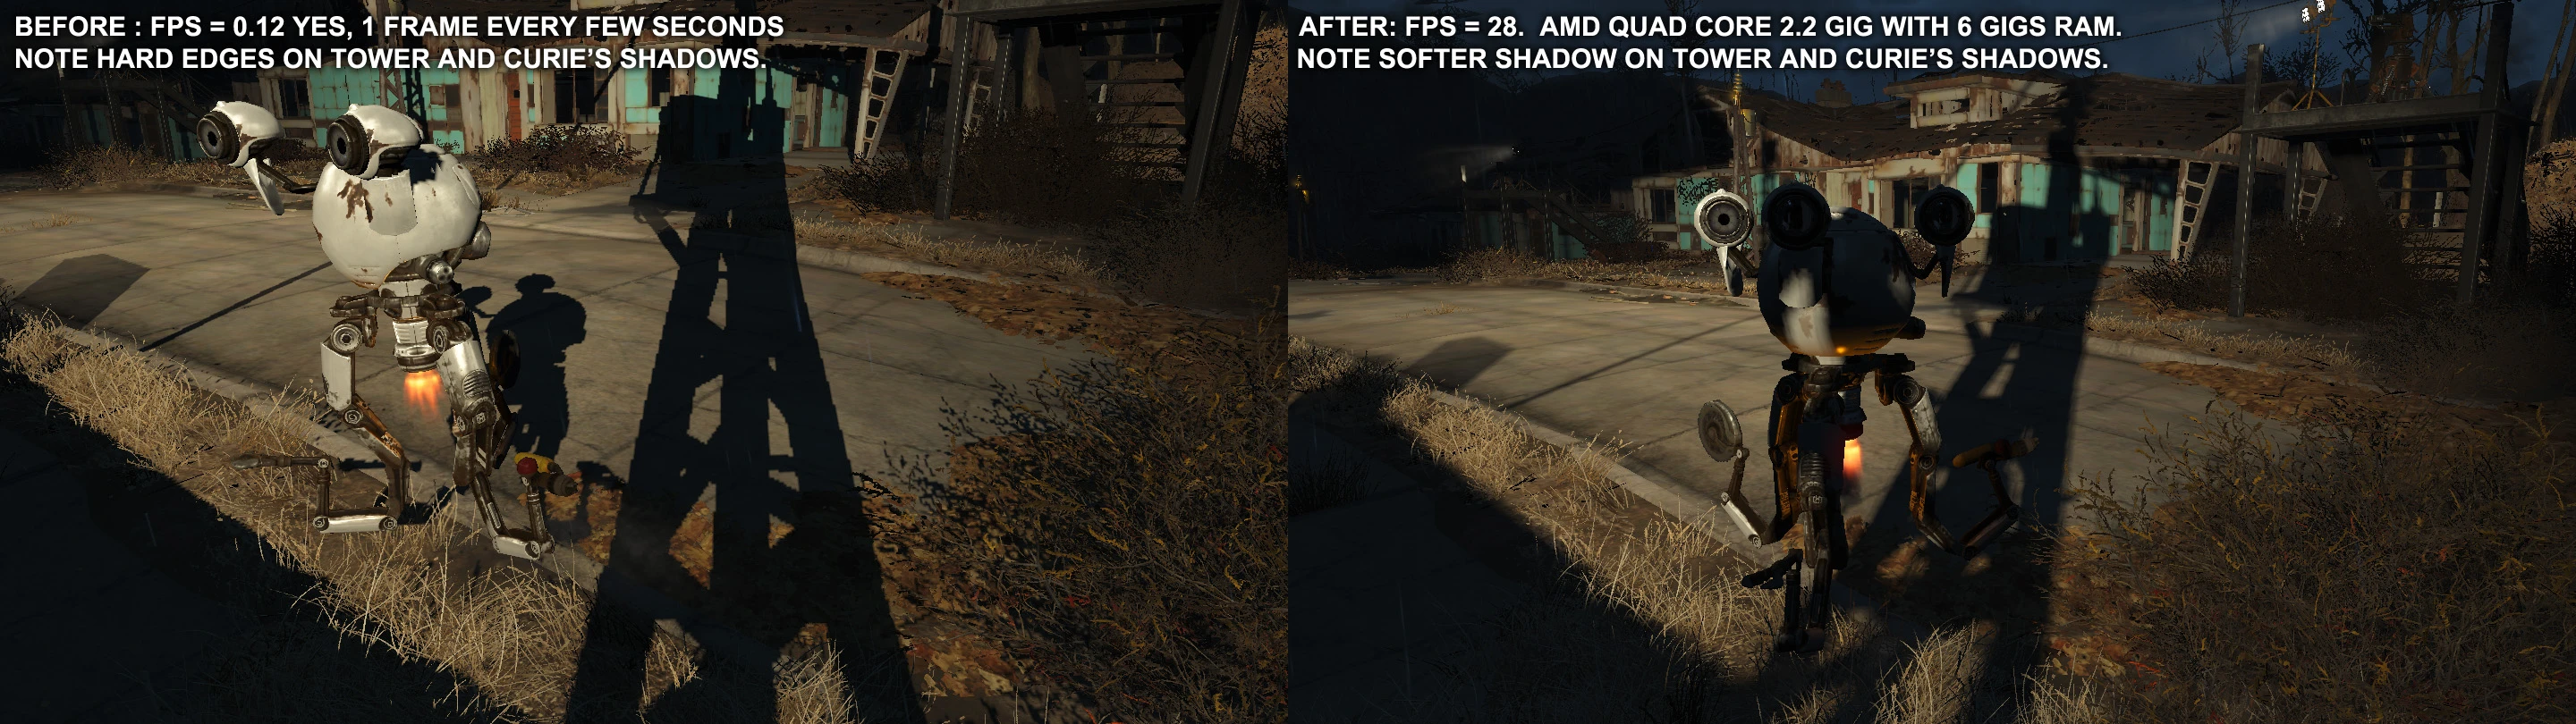 Fog remover for fallout 4 фото 19